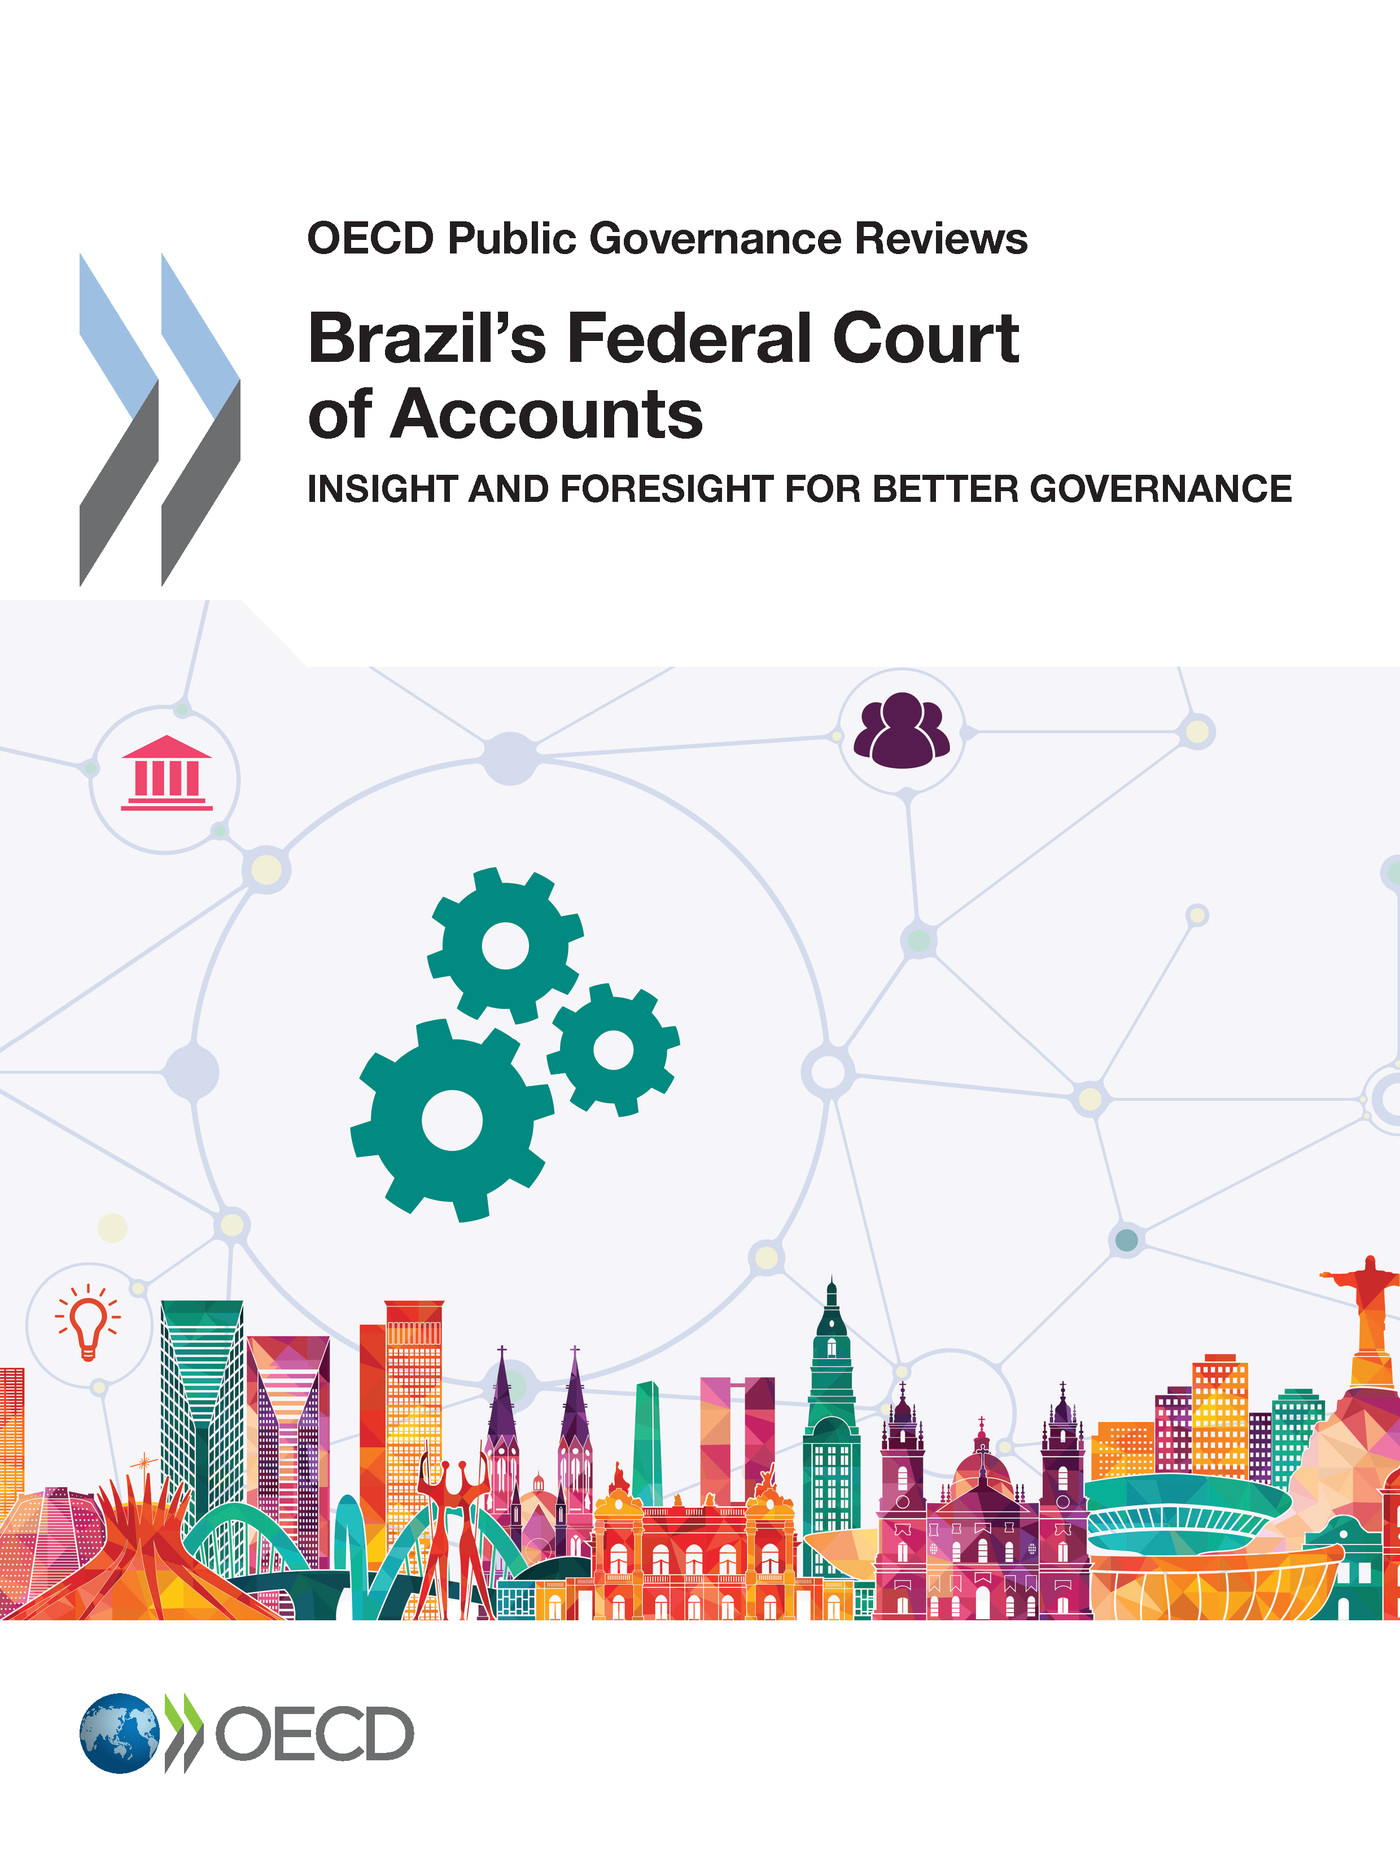 Brazil's Federal Court of Accounts -  Collectif - OCDE / OECD